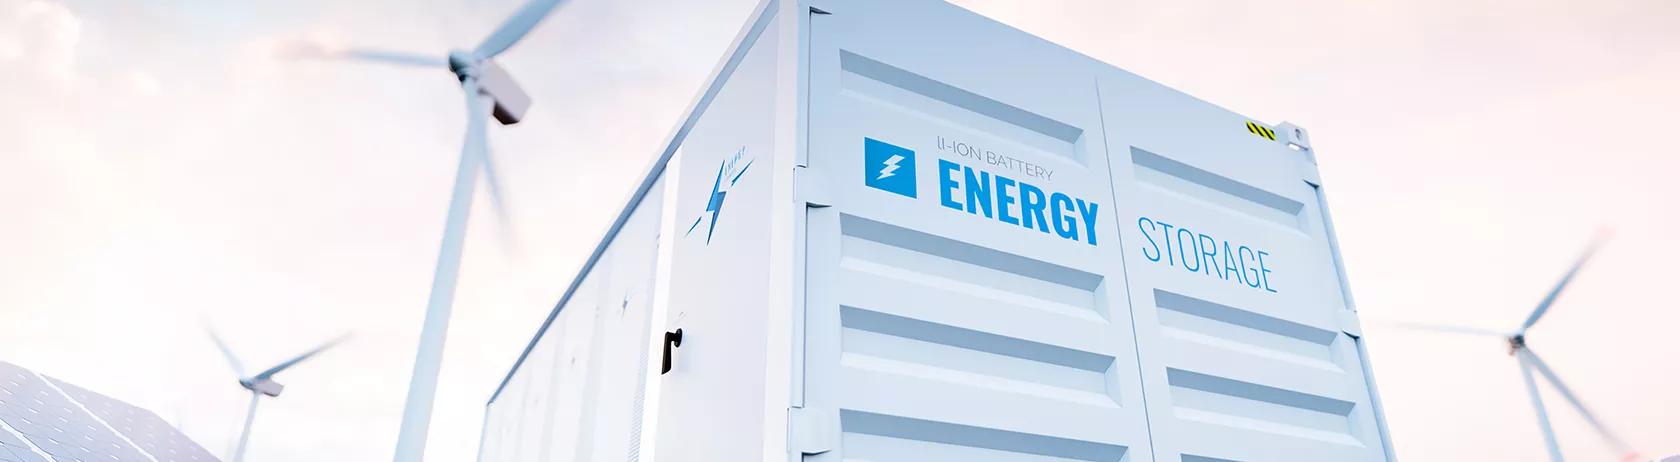 Battery energy storage systems and containers